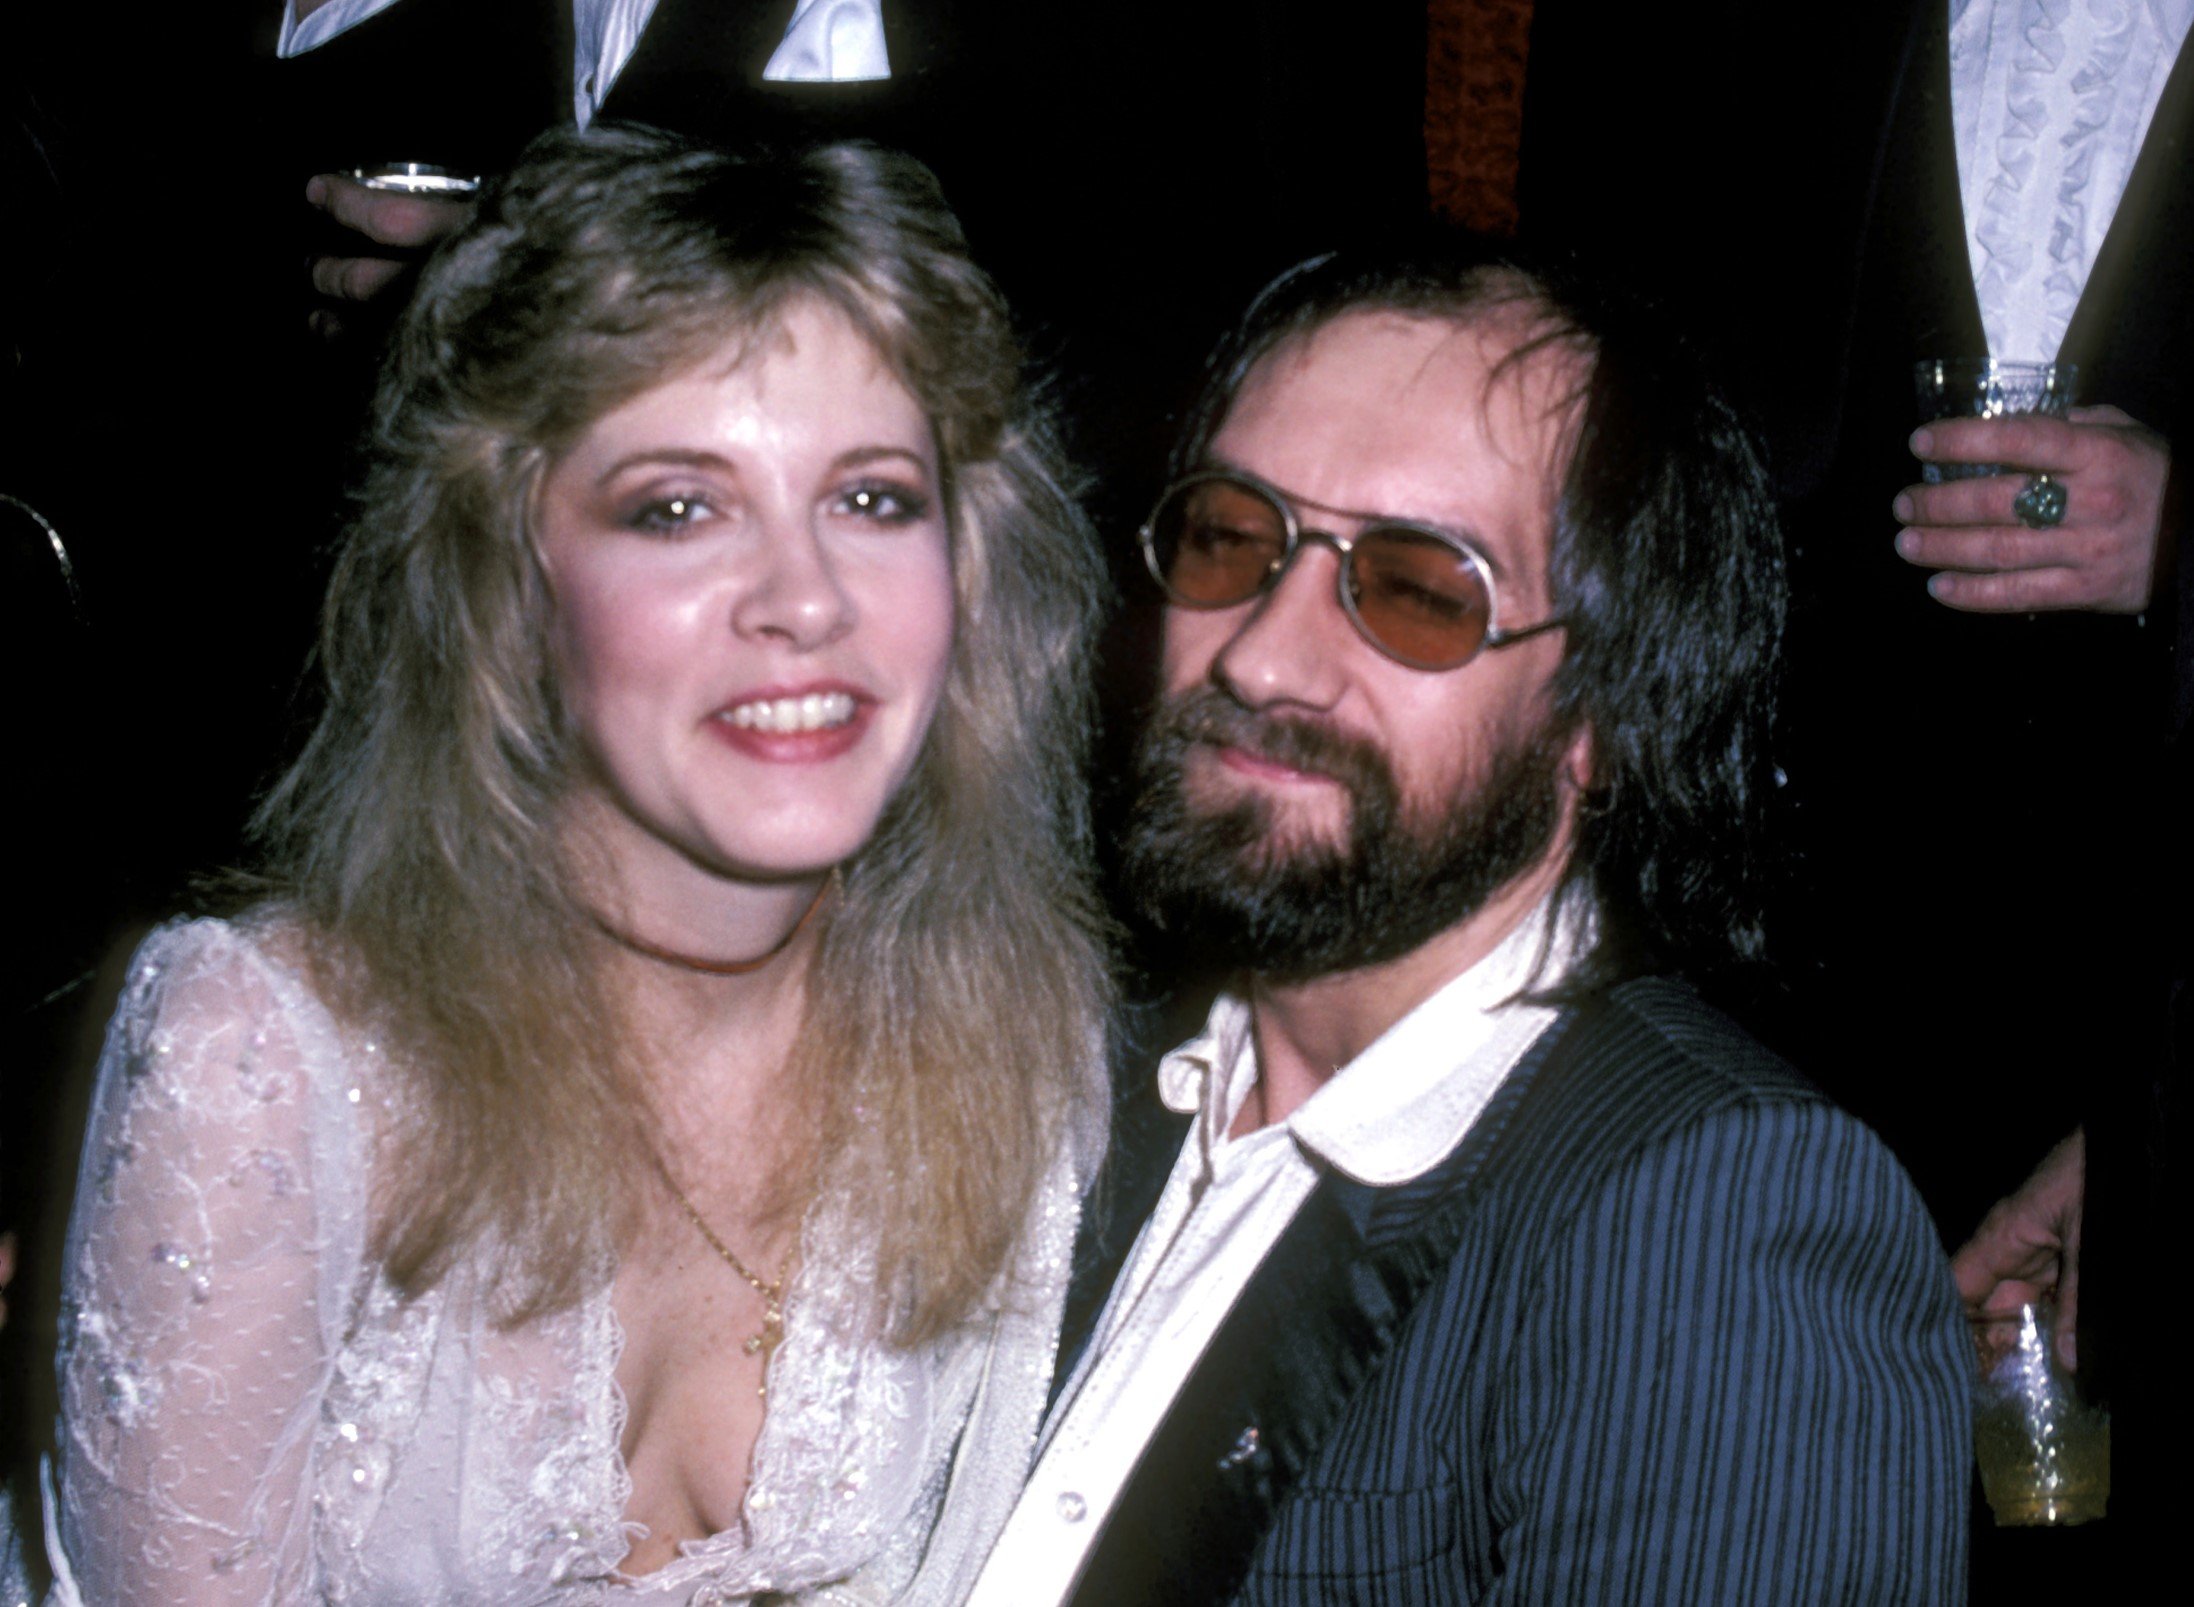 Stevie Nicks wears a white dress and sits on Mick Fleetwood's lap. He wears a blue suit jacket, white shirt, and sunglasses.